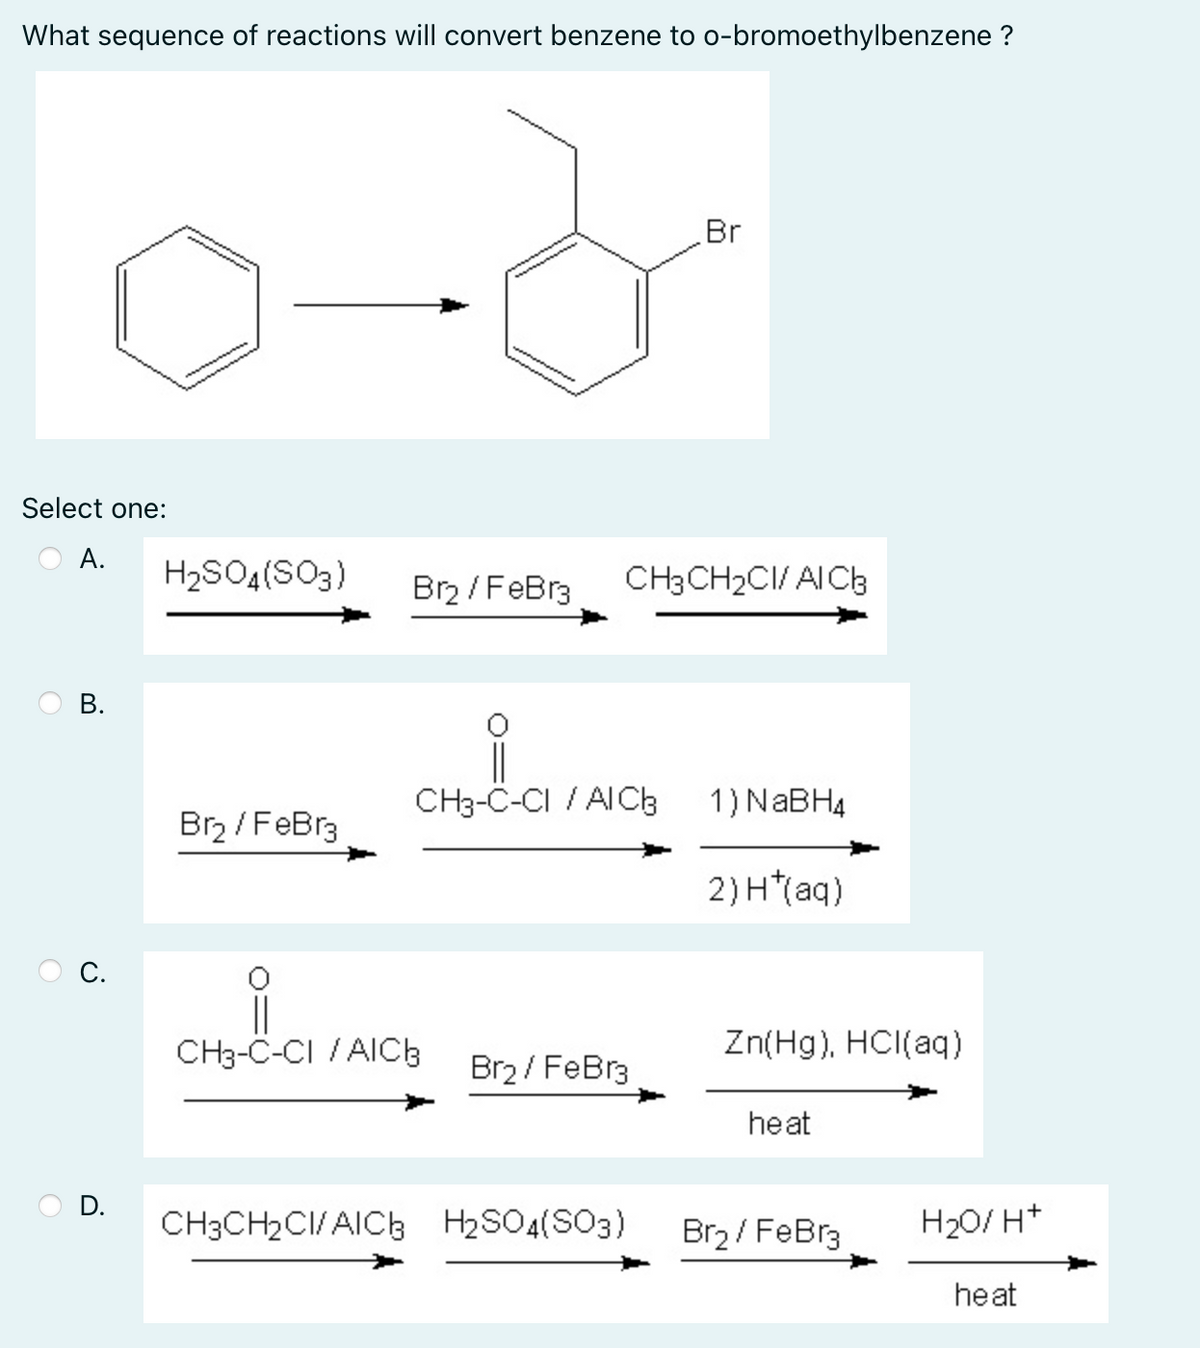 What sequence of reactions will convert benzene to o-bromoethylbenzene ?
Br
Select one:
А.
H2SO4(SO3)
Br / FeBr3
CH3CH2CI/ AICh
В.
CH3-C-CI / AICB
1) NABH4
Brz / FeBr3
2) H*(aq)
С.
CH3-C-CI / AICb
Br2 / FeBr3
Zn(Hg), HCI(aq)
heat
D.
CH3CH2CI/AICb H2SO4(SO3)
Br2 / FeBr3
H20/ H*
heat
